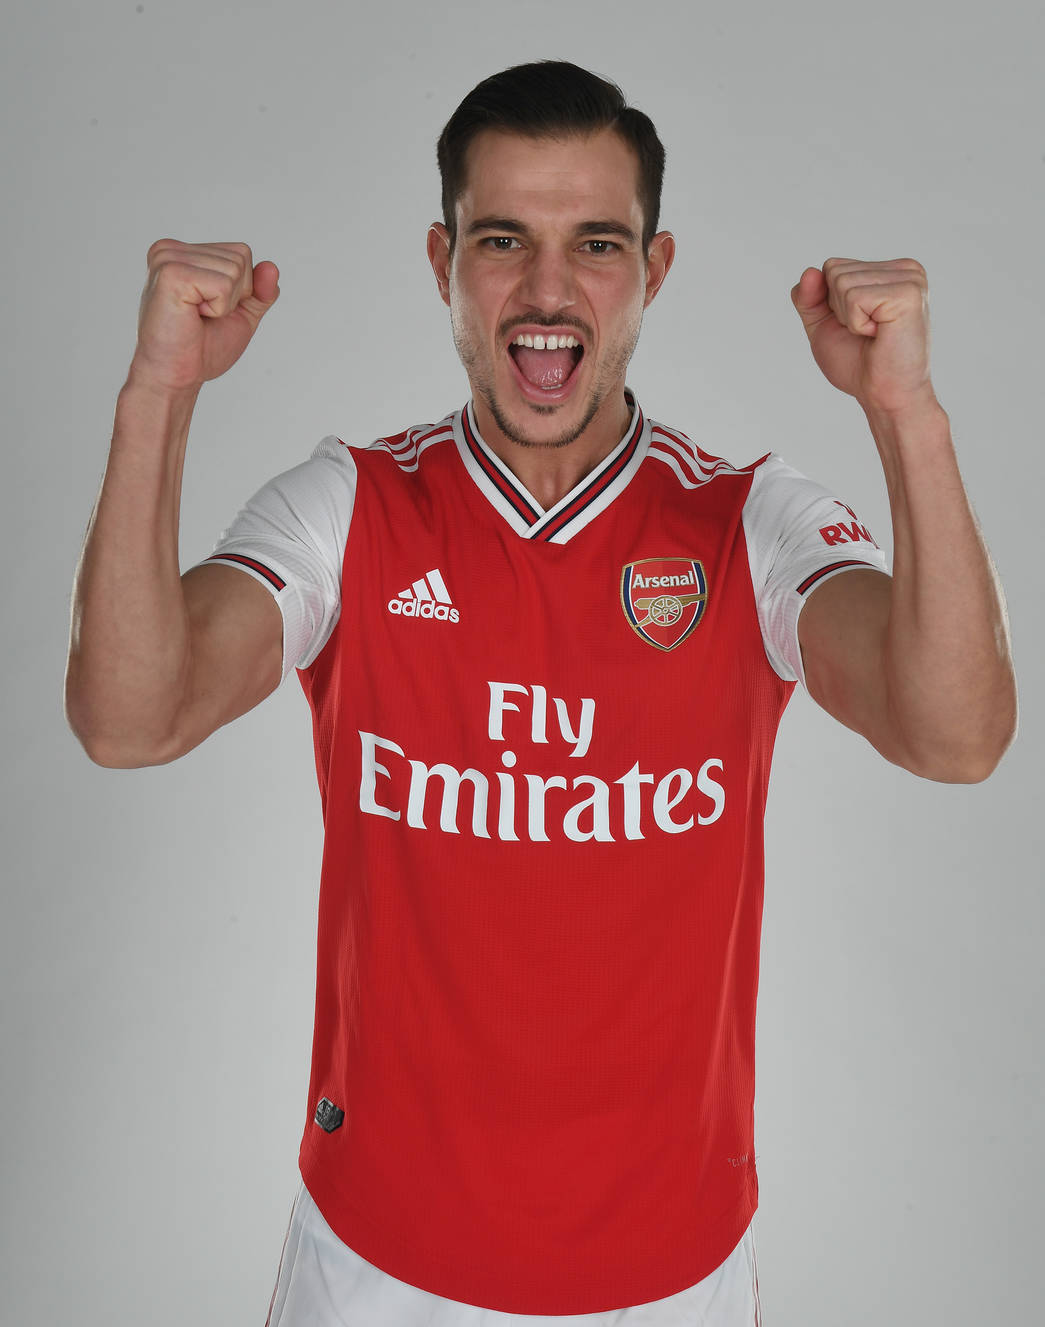 ST ALBANS, ENGLAND - JANUARY 30: Arsenal unveil new signing Cedric Soares at London Colney on January 30, 2020 in St Albans, England. (Photo by Stuart MacFarlane/Arsenal FC via Getty Images)